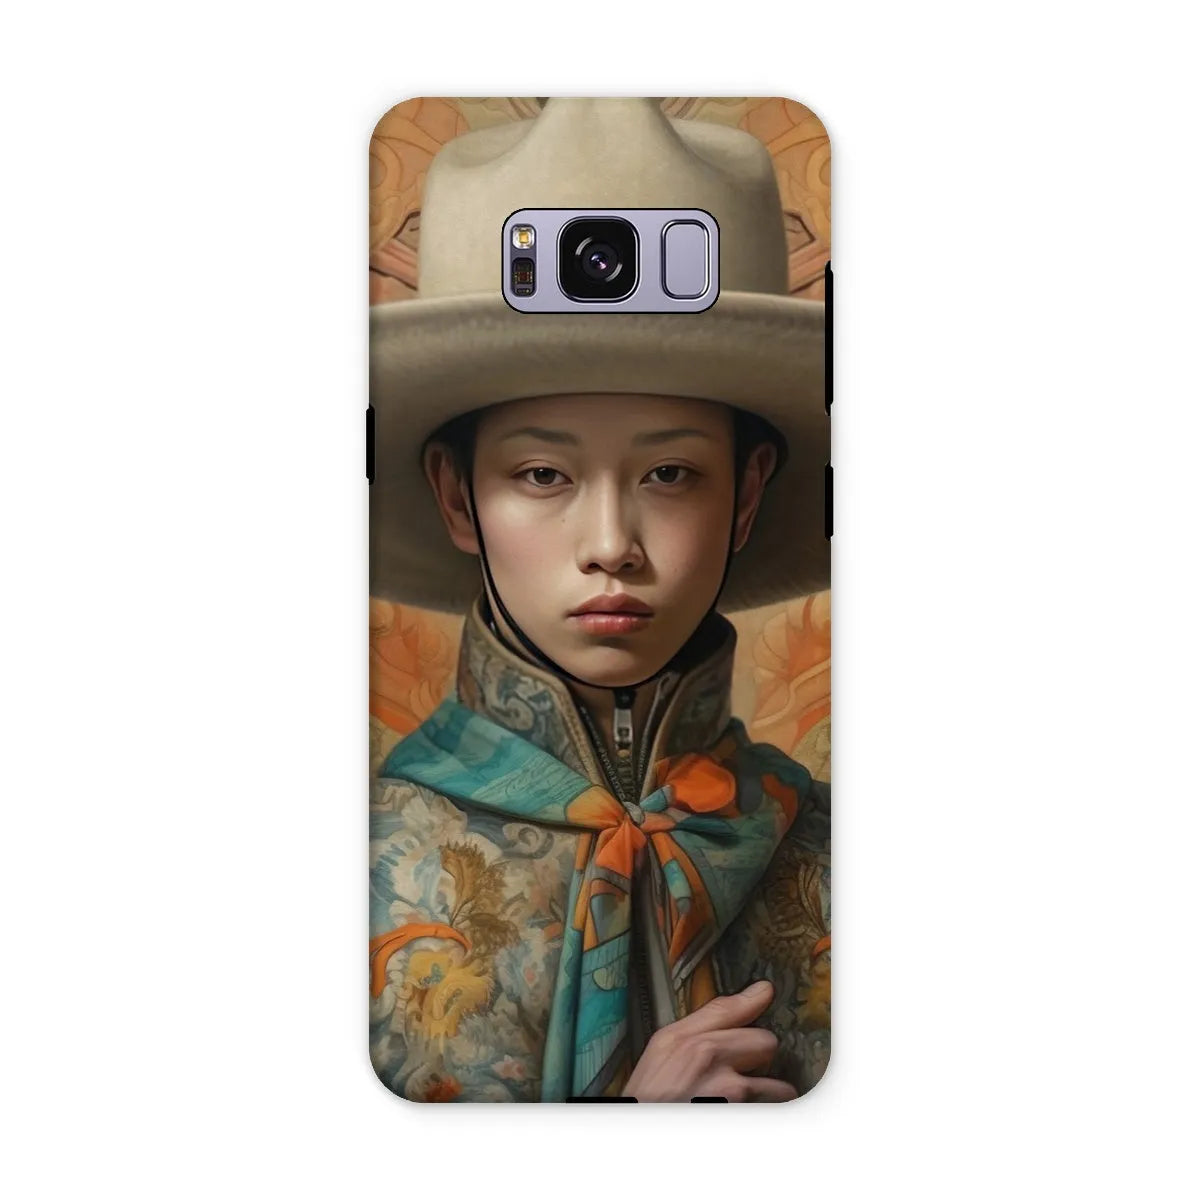 Xiang - Gaysian Chinese Cowboy Aesthetic Art Phone Case - Samsung Galaxy S8 Plus / Matte - Mobile Phone Cases